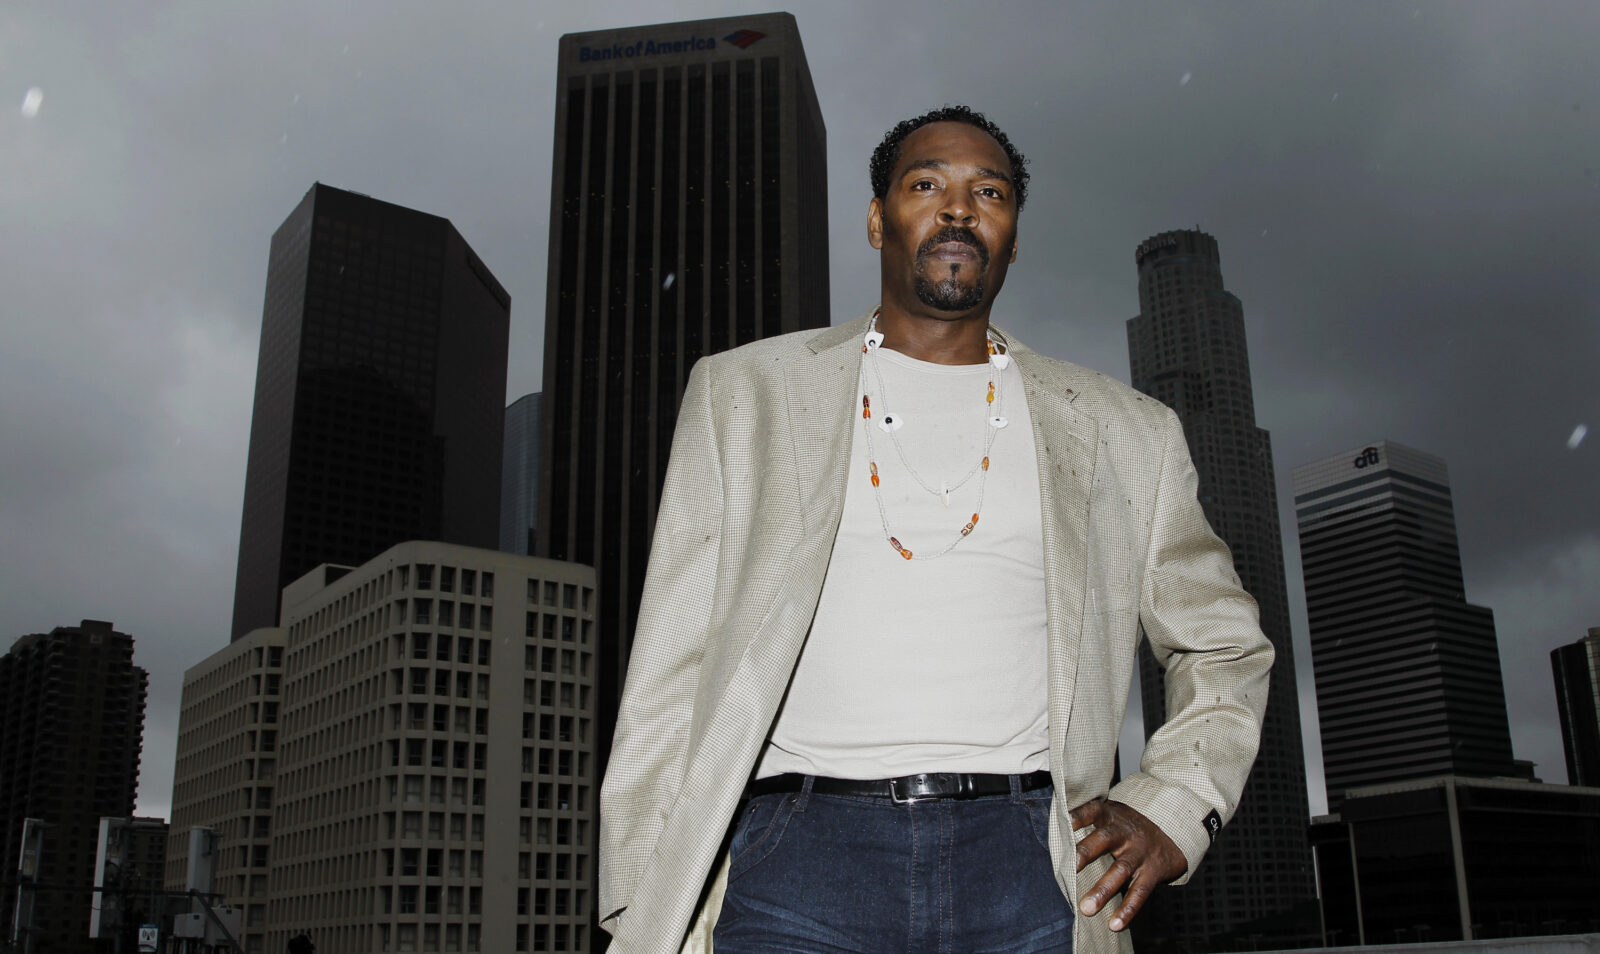 Rodney King in Los Angeles in 2012. King was beaten bloody by the Los Angeles Police Department in 1991. As a response, Congress passed legislation which empowered the U.S. Justice Department to investigate police agencies and press for local reforms. (AP Photo/Matt Sayles)